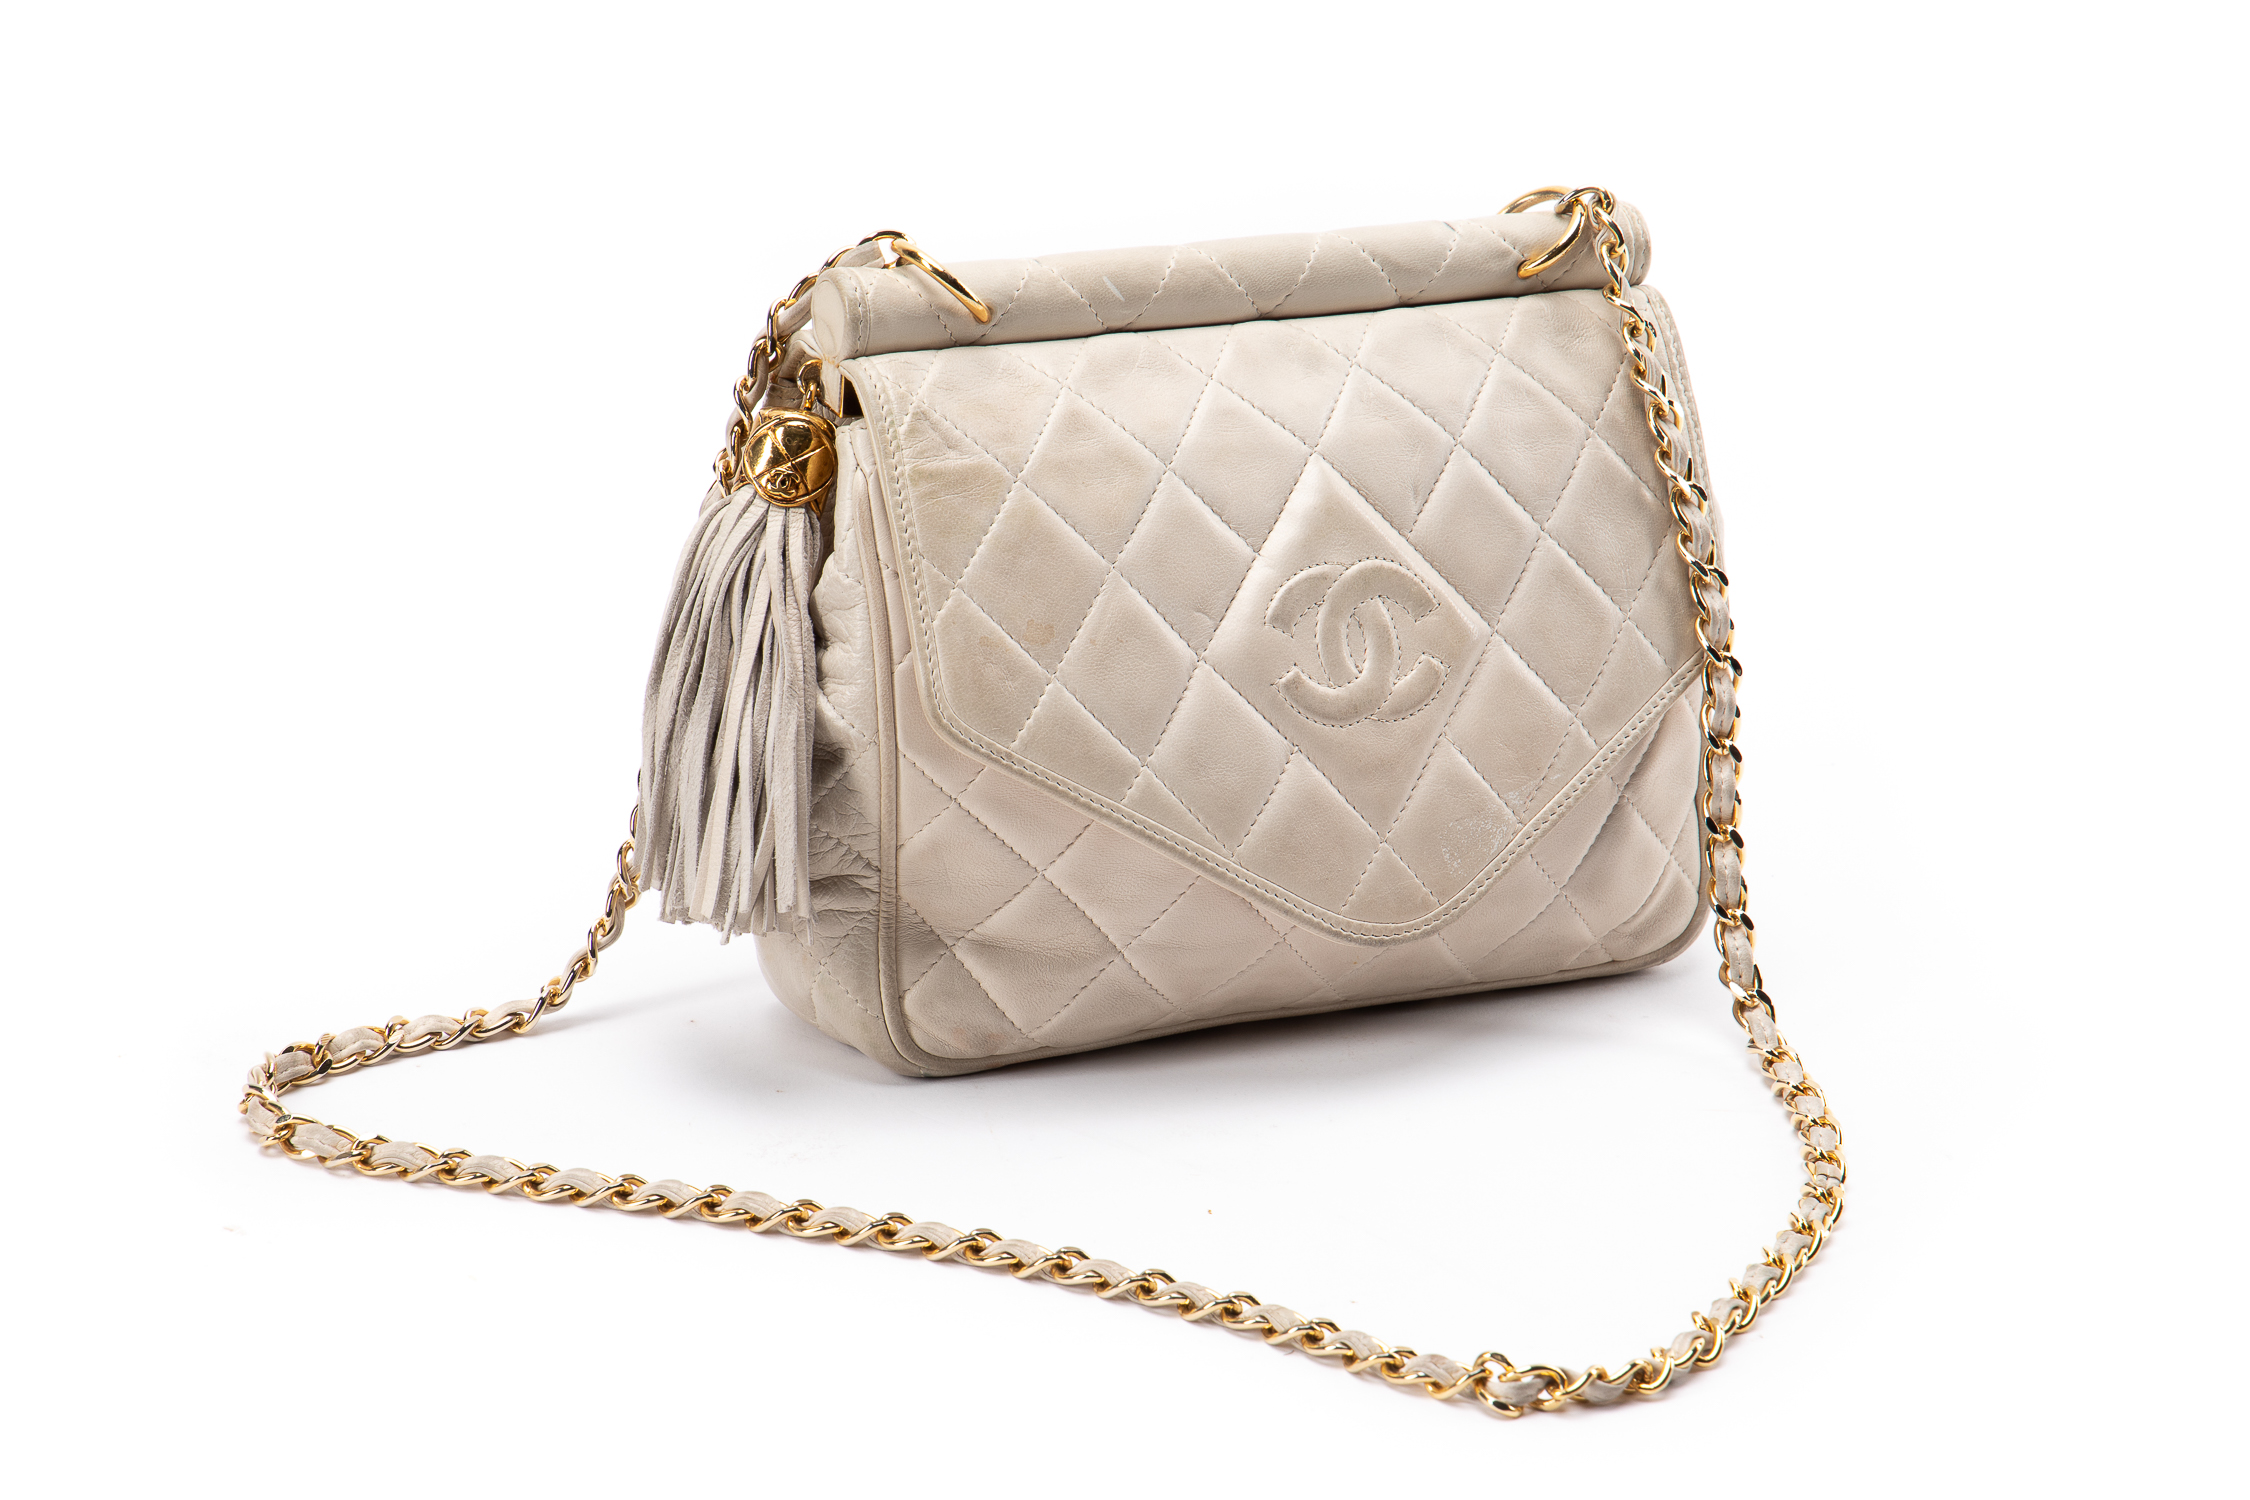 CHANEL CREAM LEATHER QUILTED FLAP 357c25